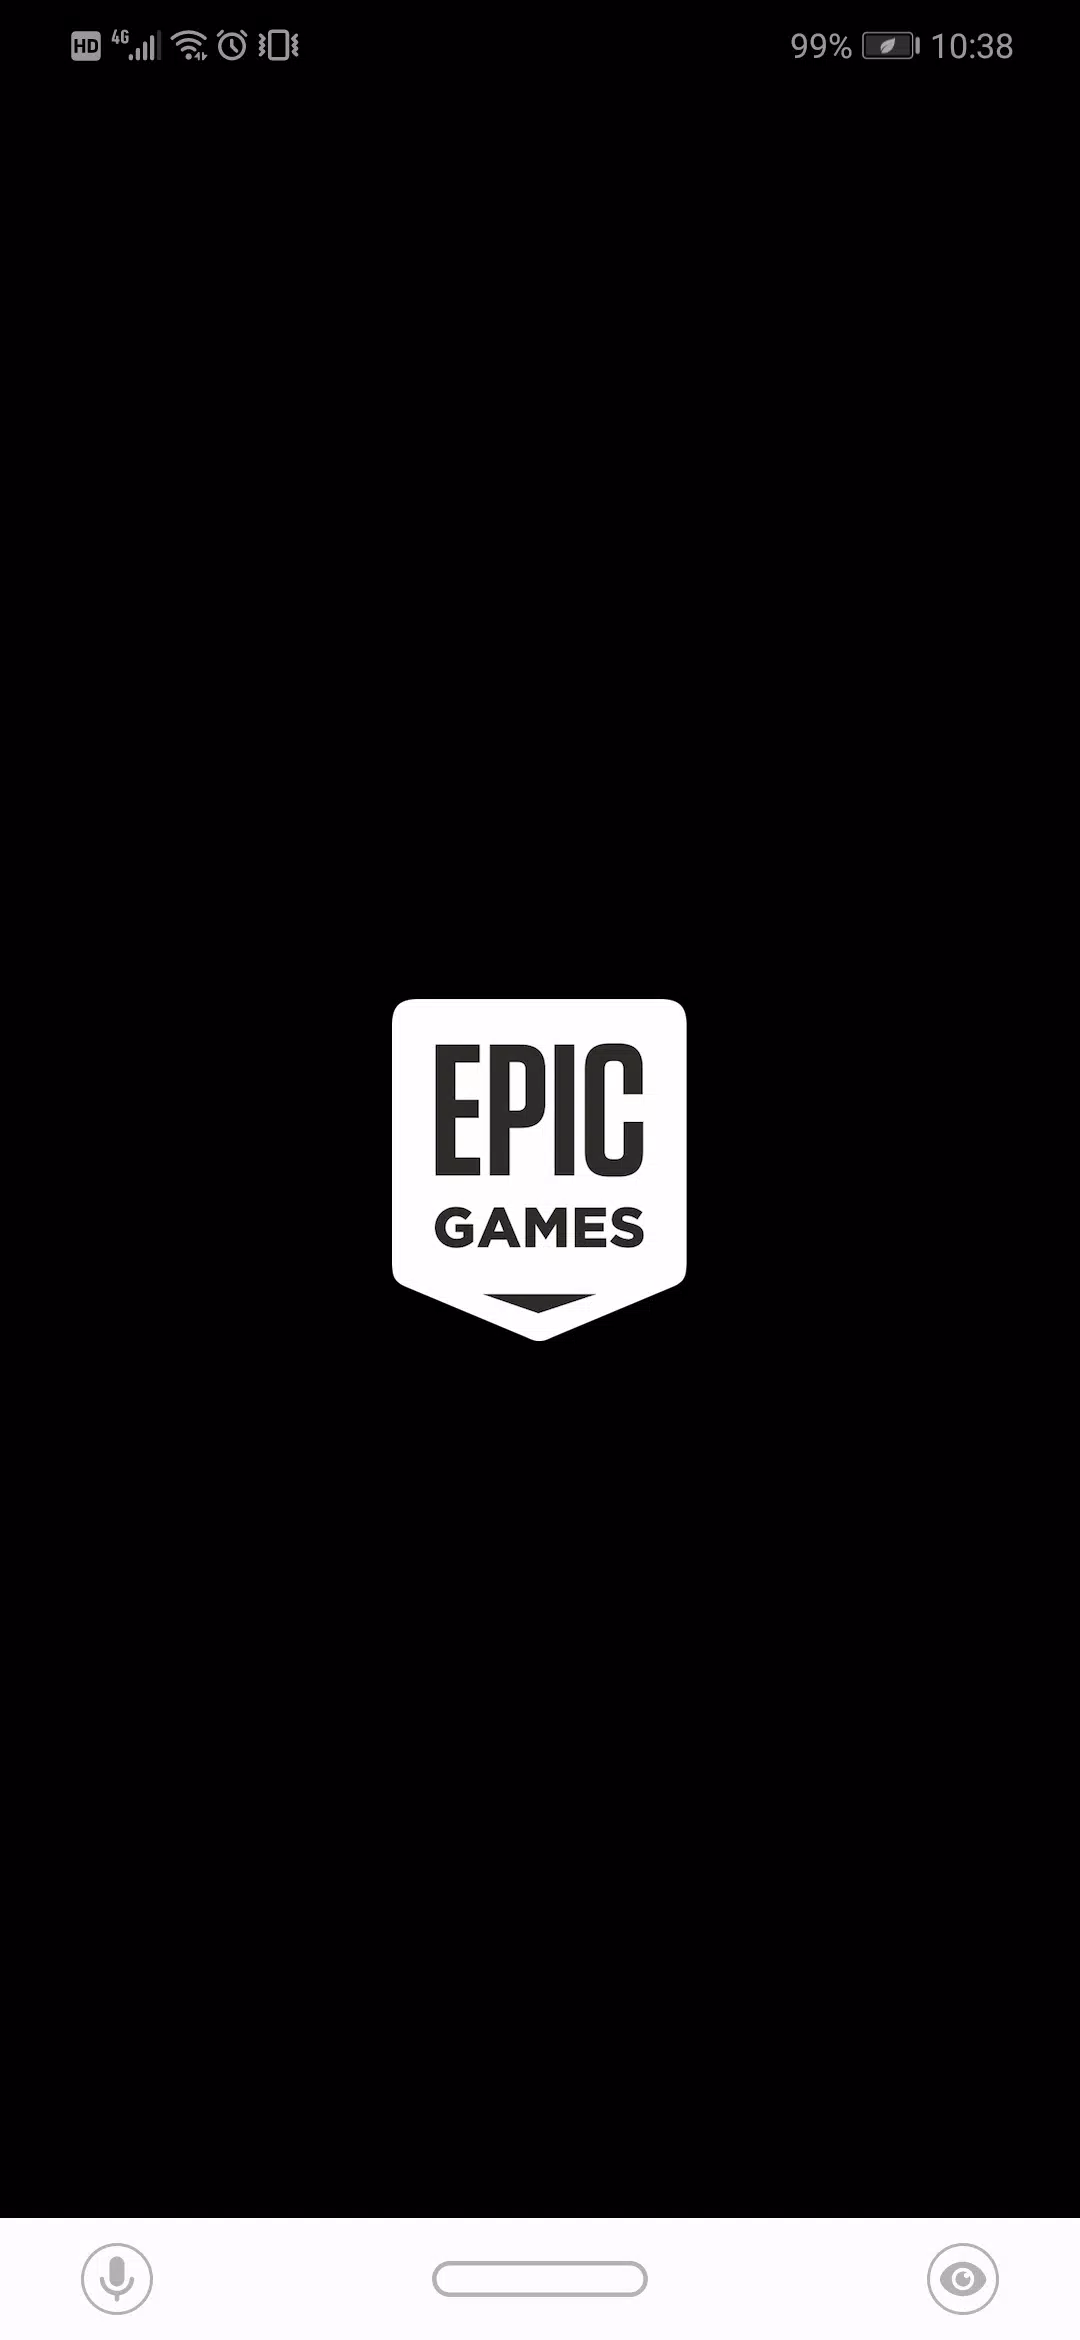 Download the Epic Games APK for FREE on your cell phone 